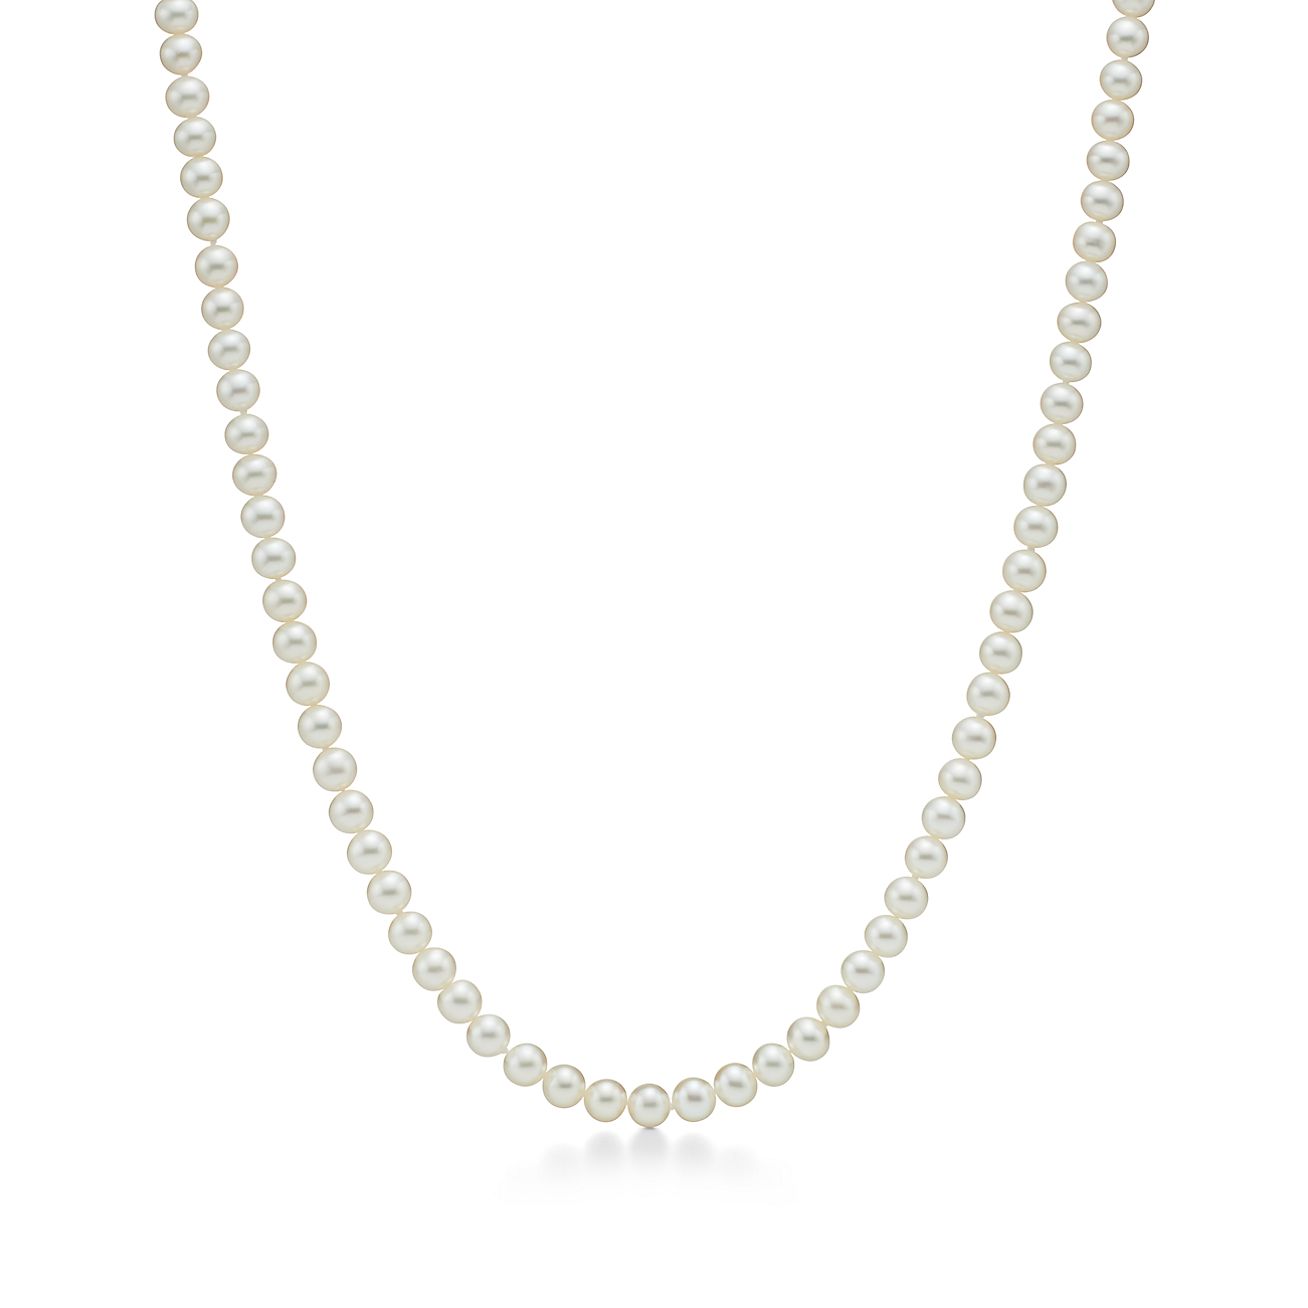 Ziegfeld Collection pearl necklace with a silver clasp and decorative tag,  6-7 mm.